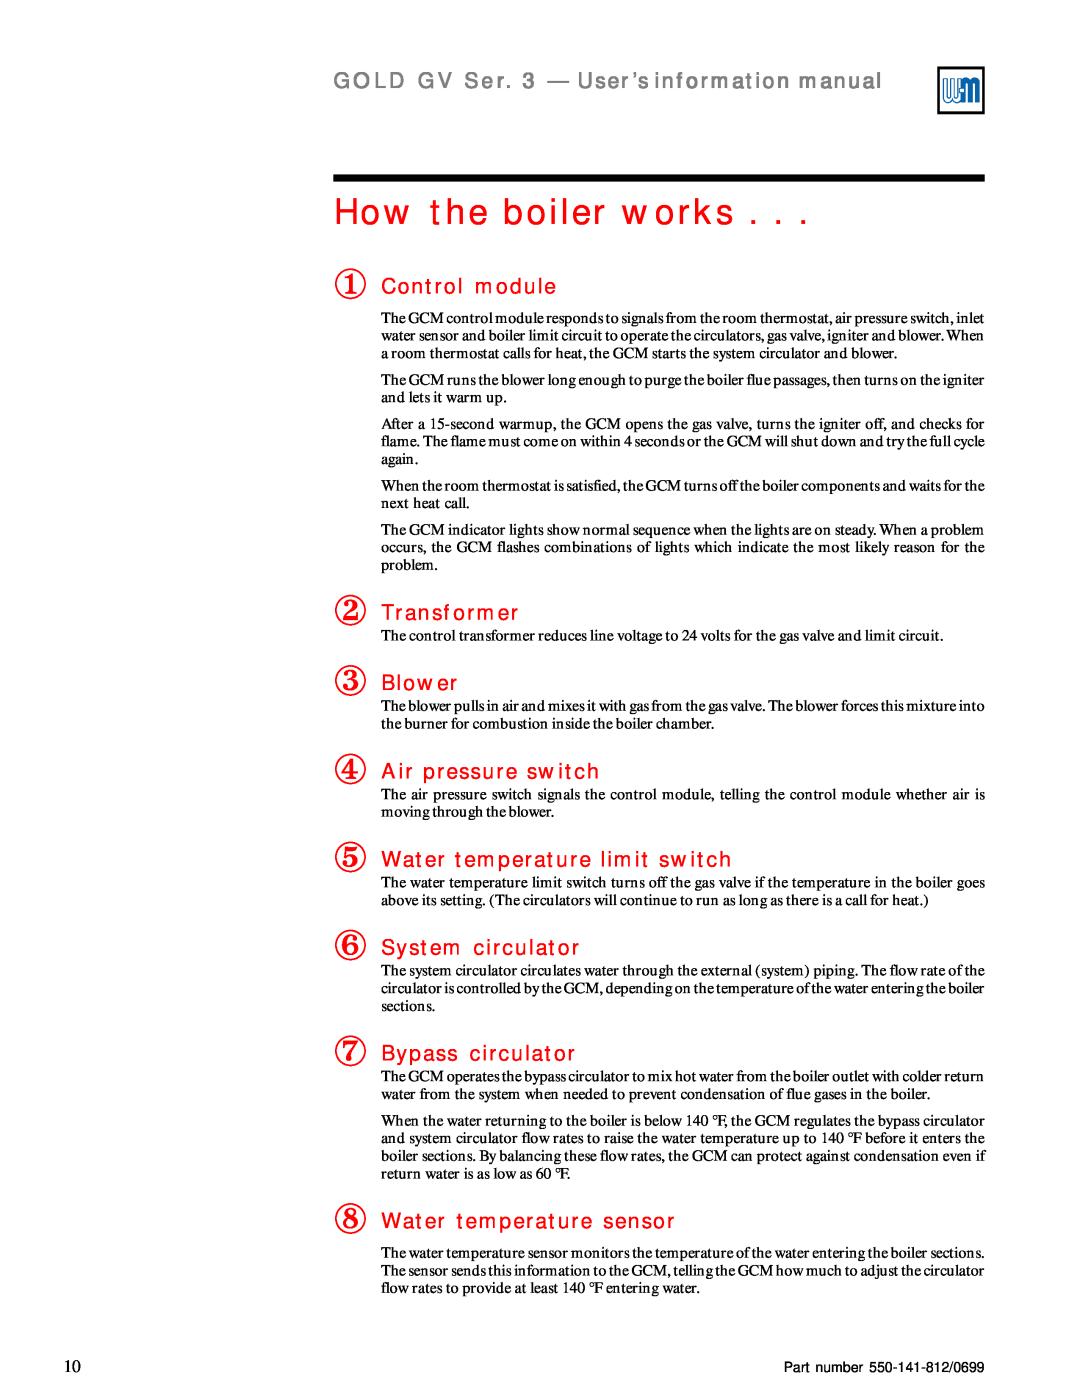 Weil-McLain 3 Series How the boiler works, GOLD GV Ser. 3 — User’s information manual, ①Control module, Transformer 